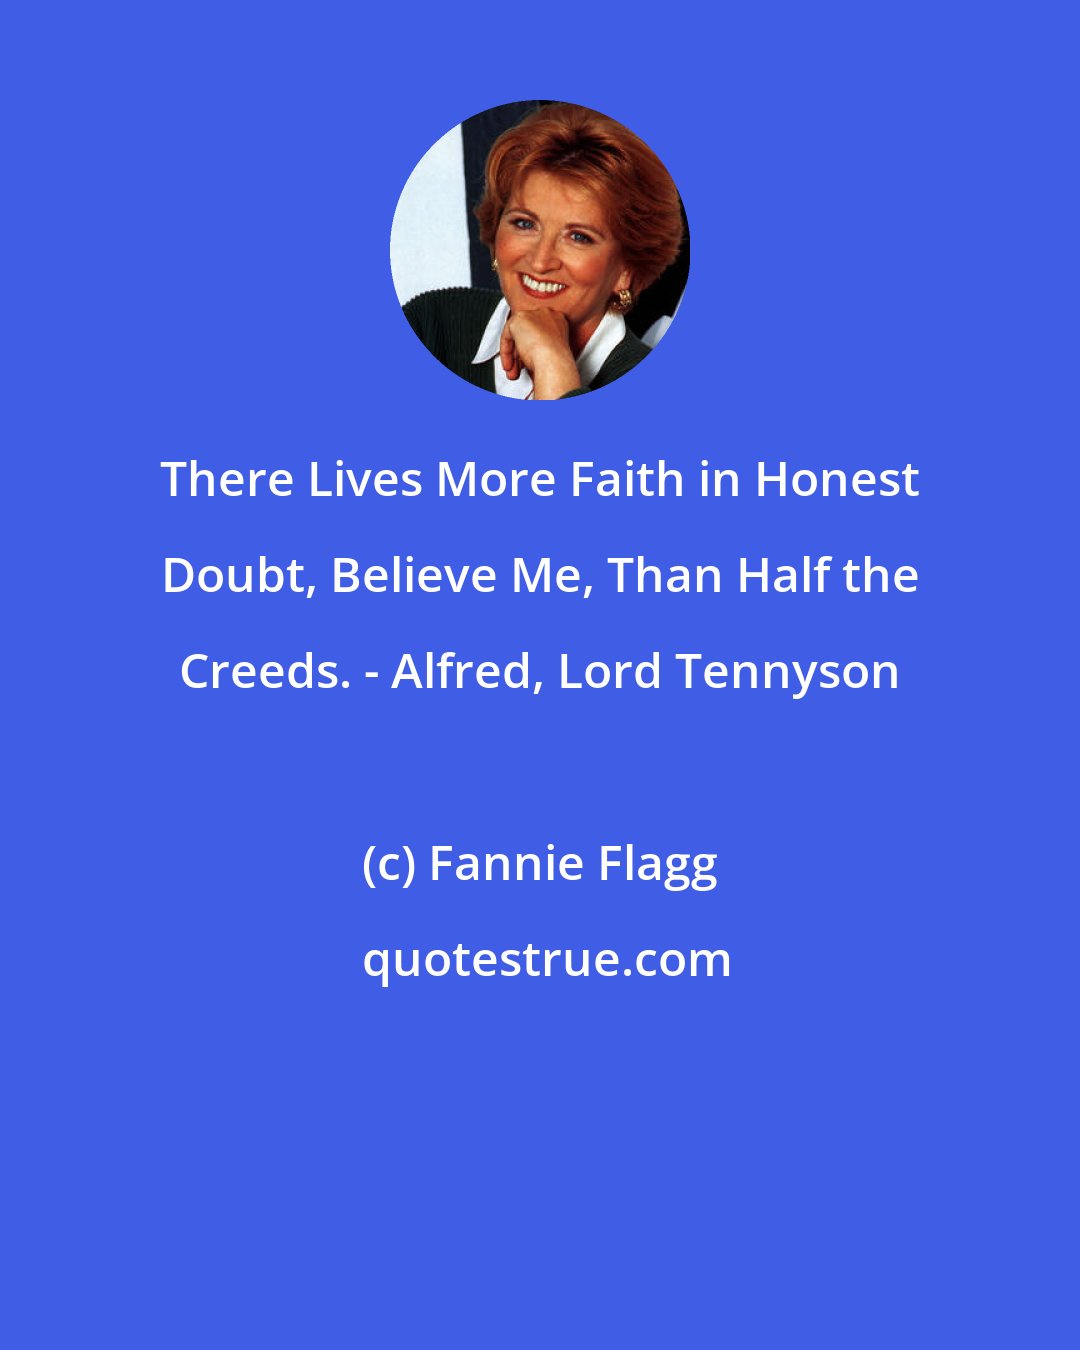 Fannie Flagg: There Lives More Faith in Honest Doubt, Believe Me, Than Half the Creeds. - Alfred, Lord Tennyson